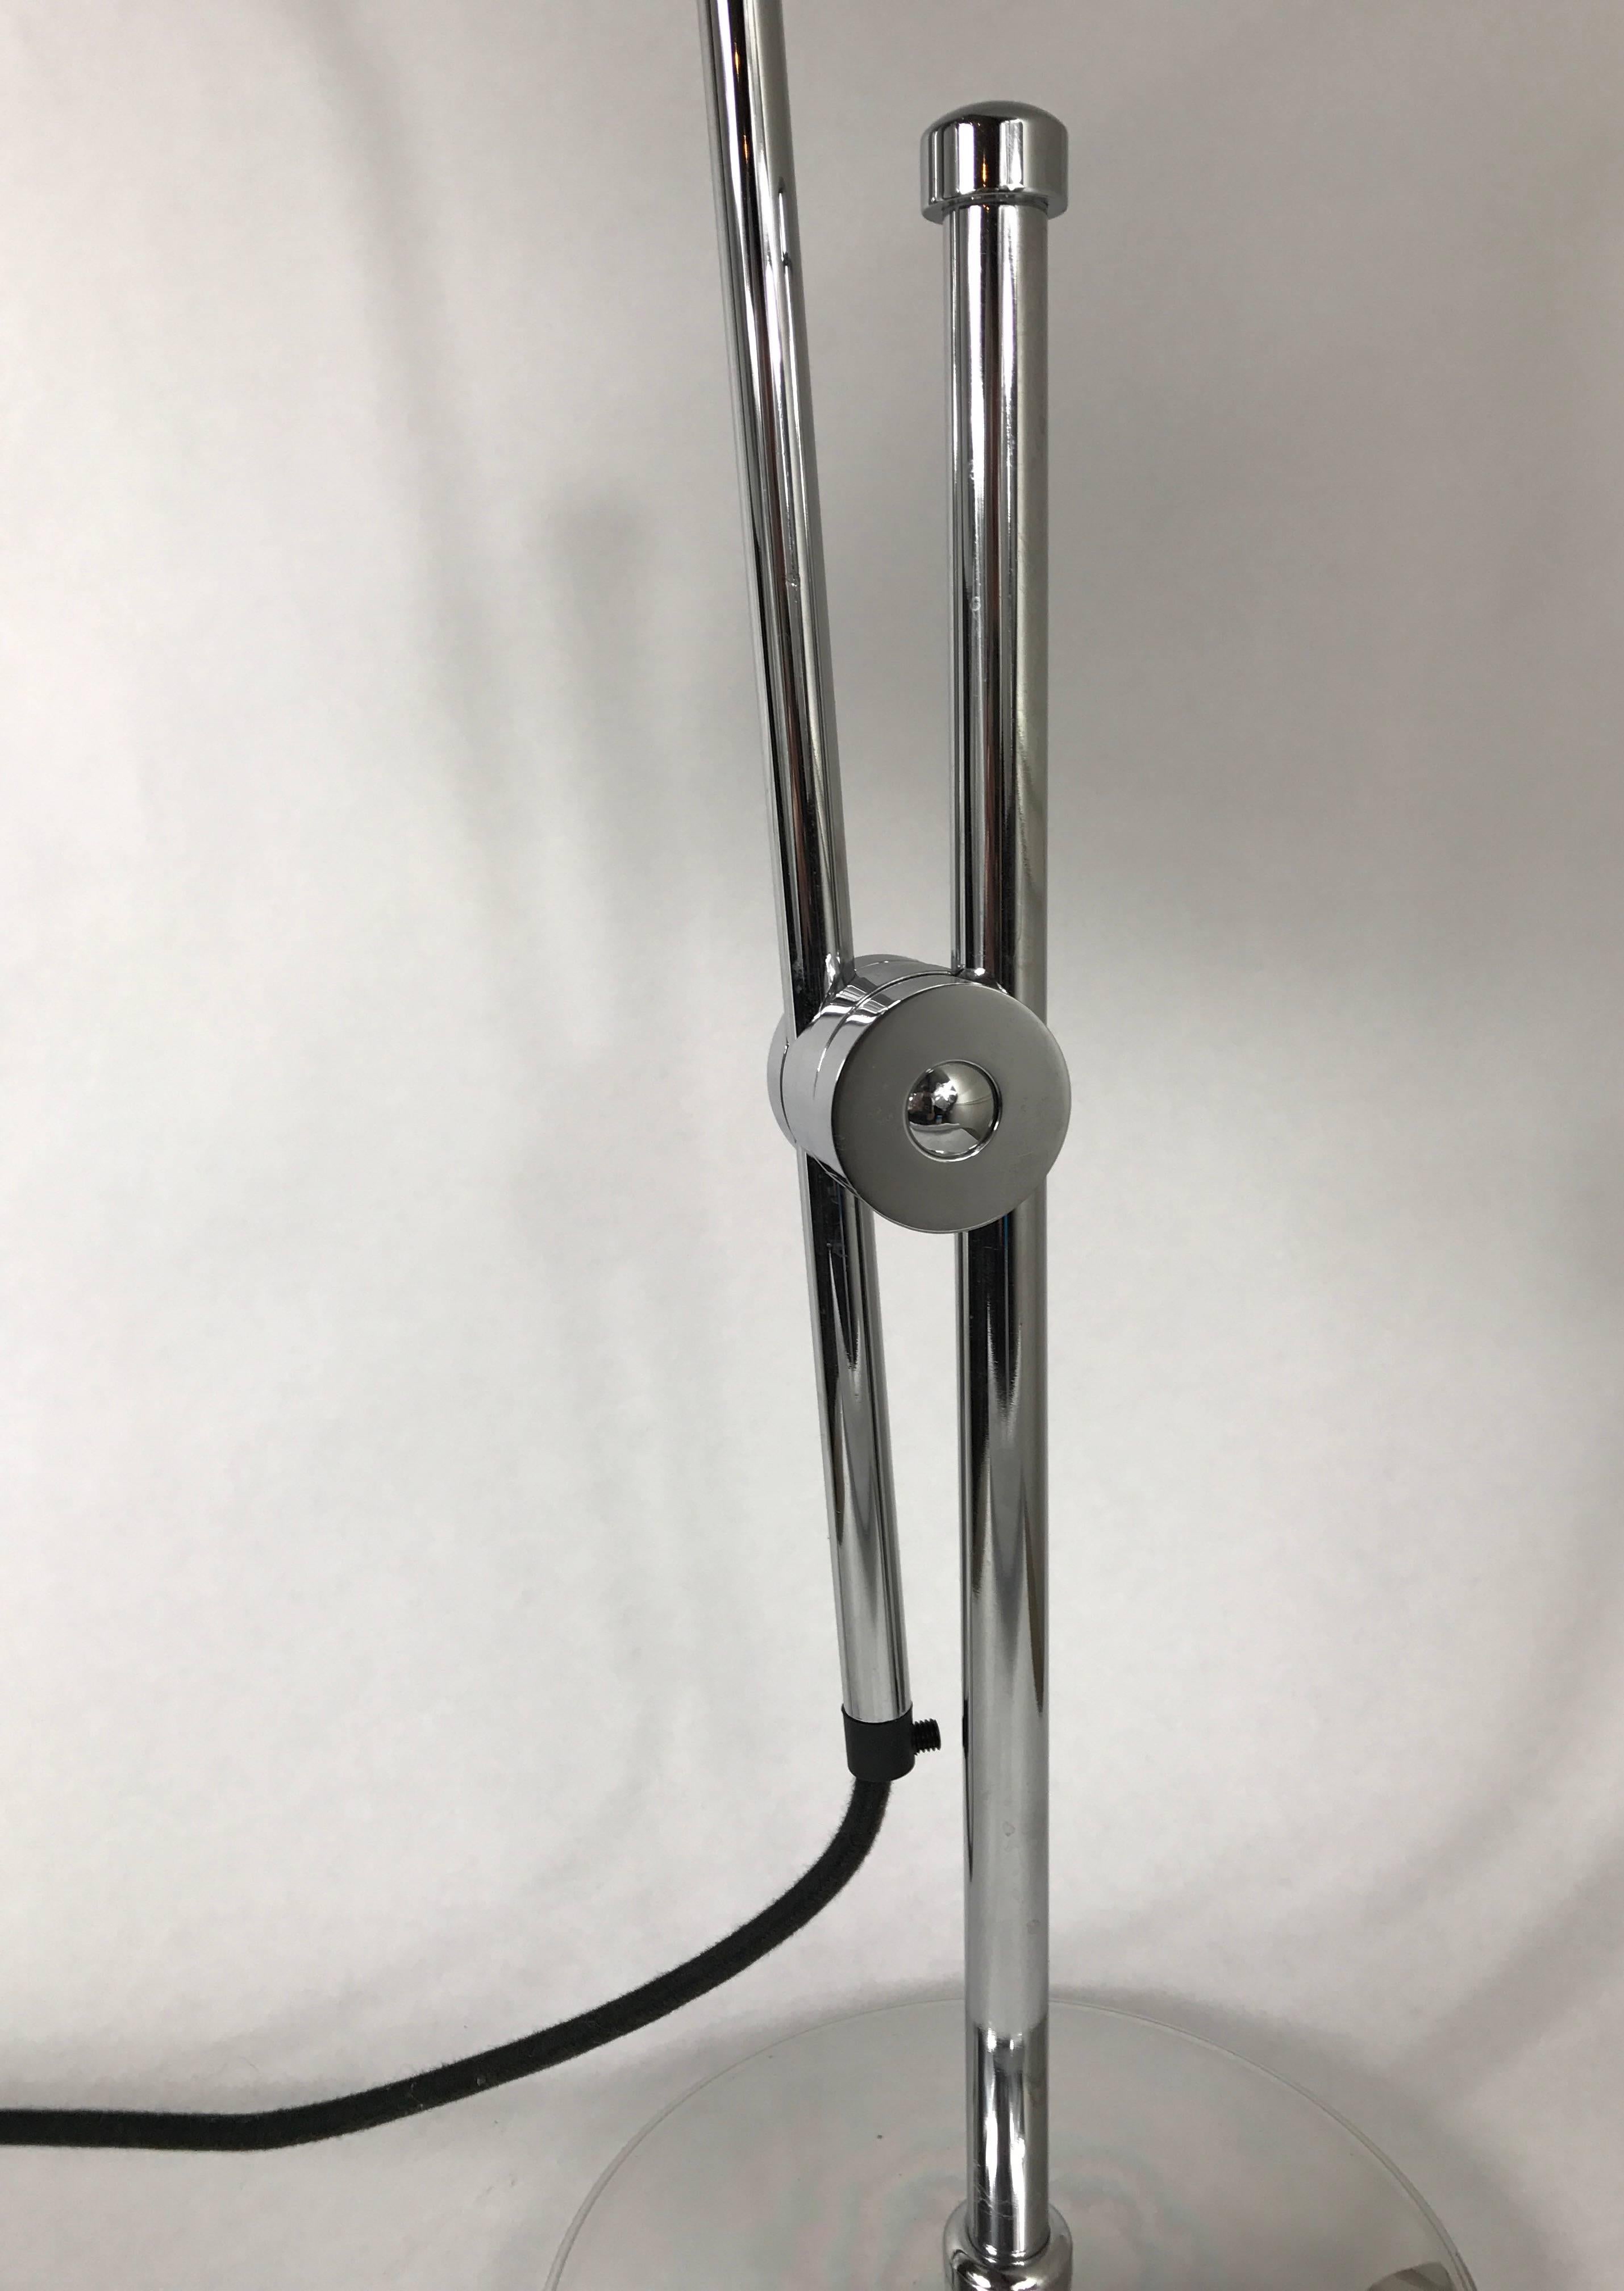 A BTC England task lamp in polished aluminium. Adjustable swing arm and shade.